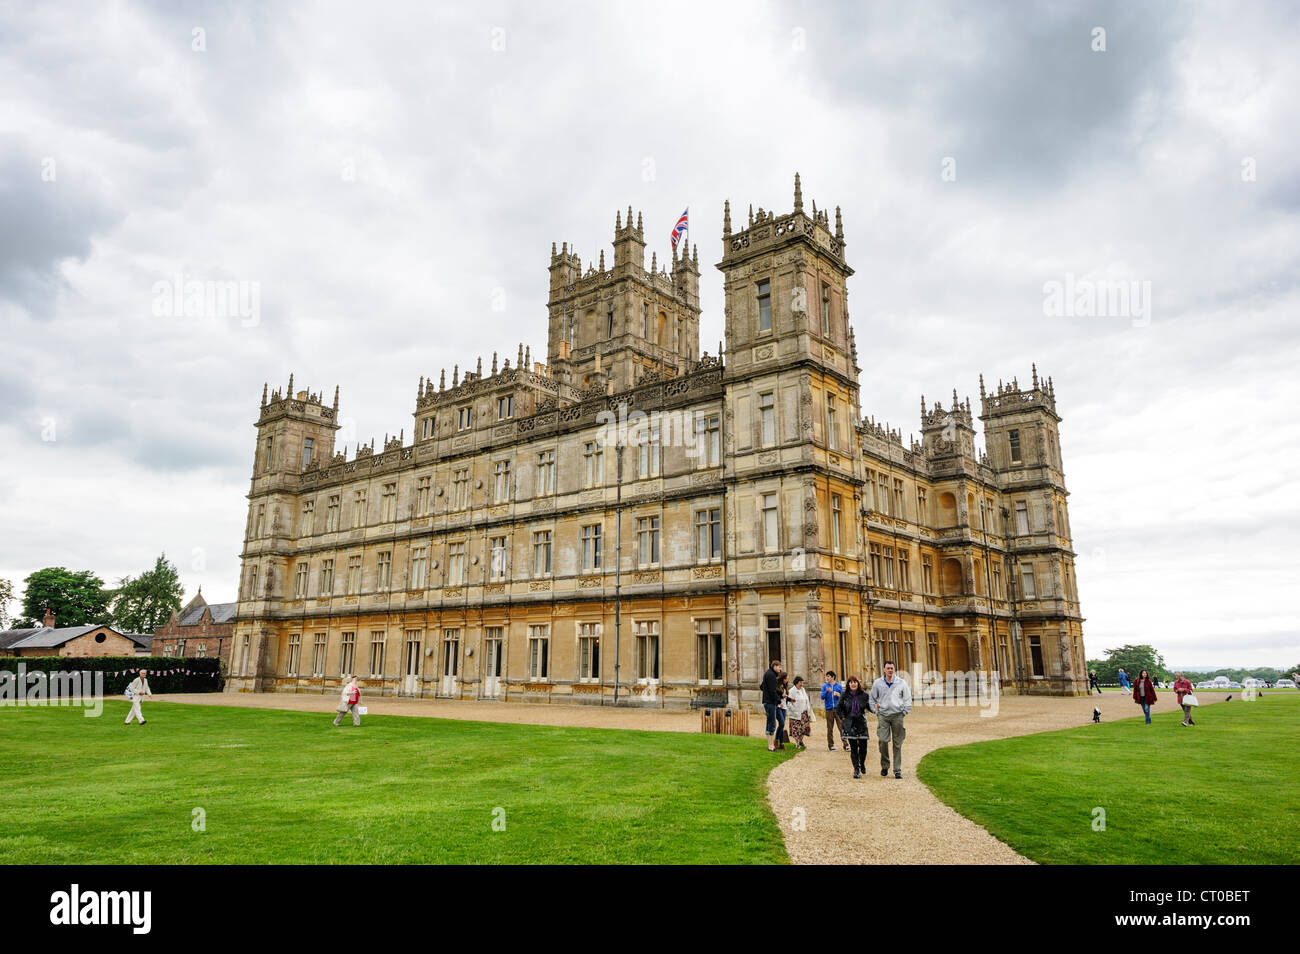 HIGHCLERE CASTLE, UK - Highclere Castle, in Hampshire, is famous for being the setting for the hit British TV show Downton Abbey. It is the home of the Earl and Countess of Carnarvon and is open to visitors for parts of the year. Stock Photo